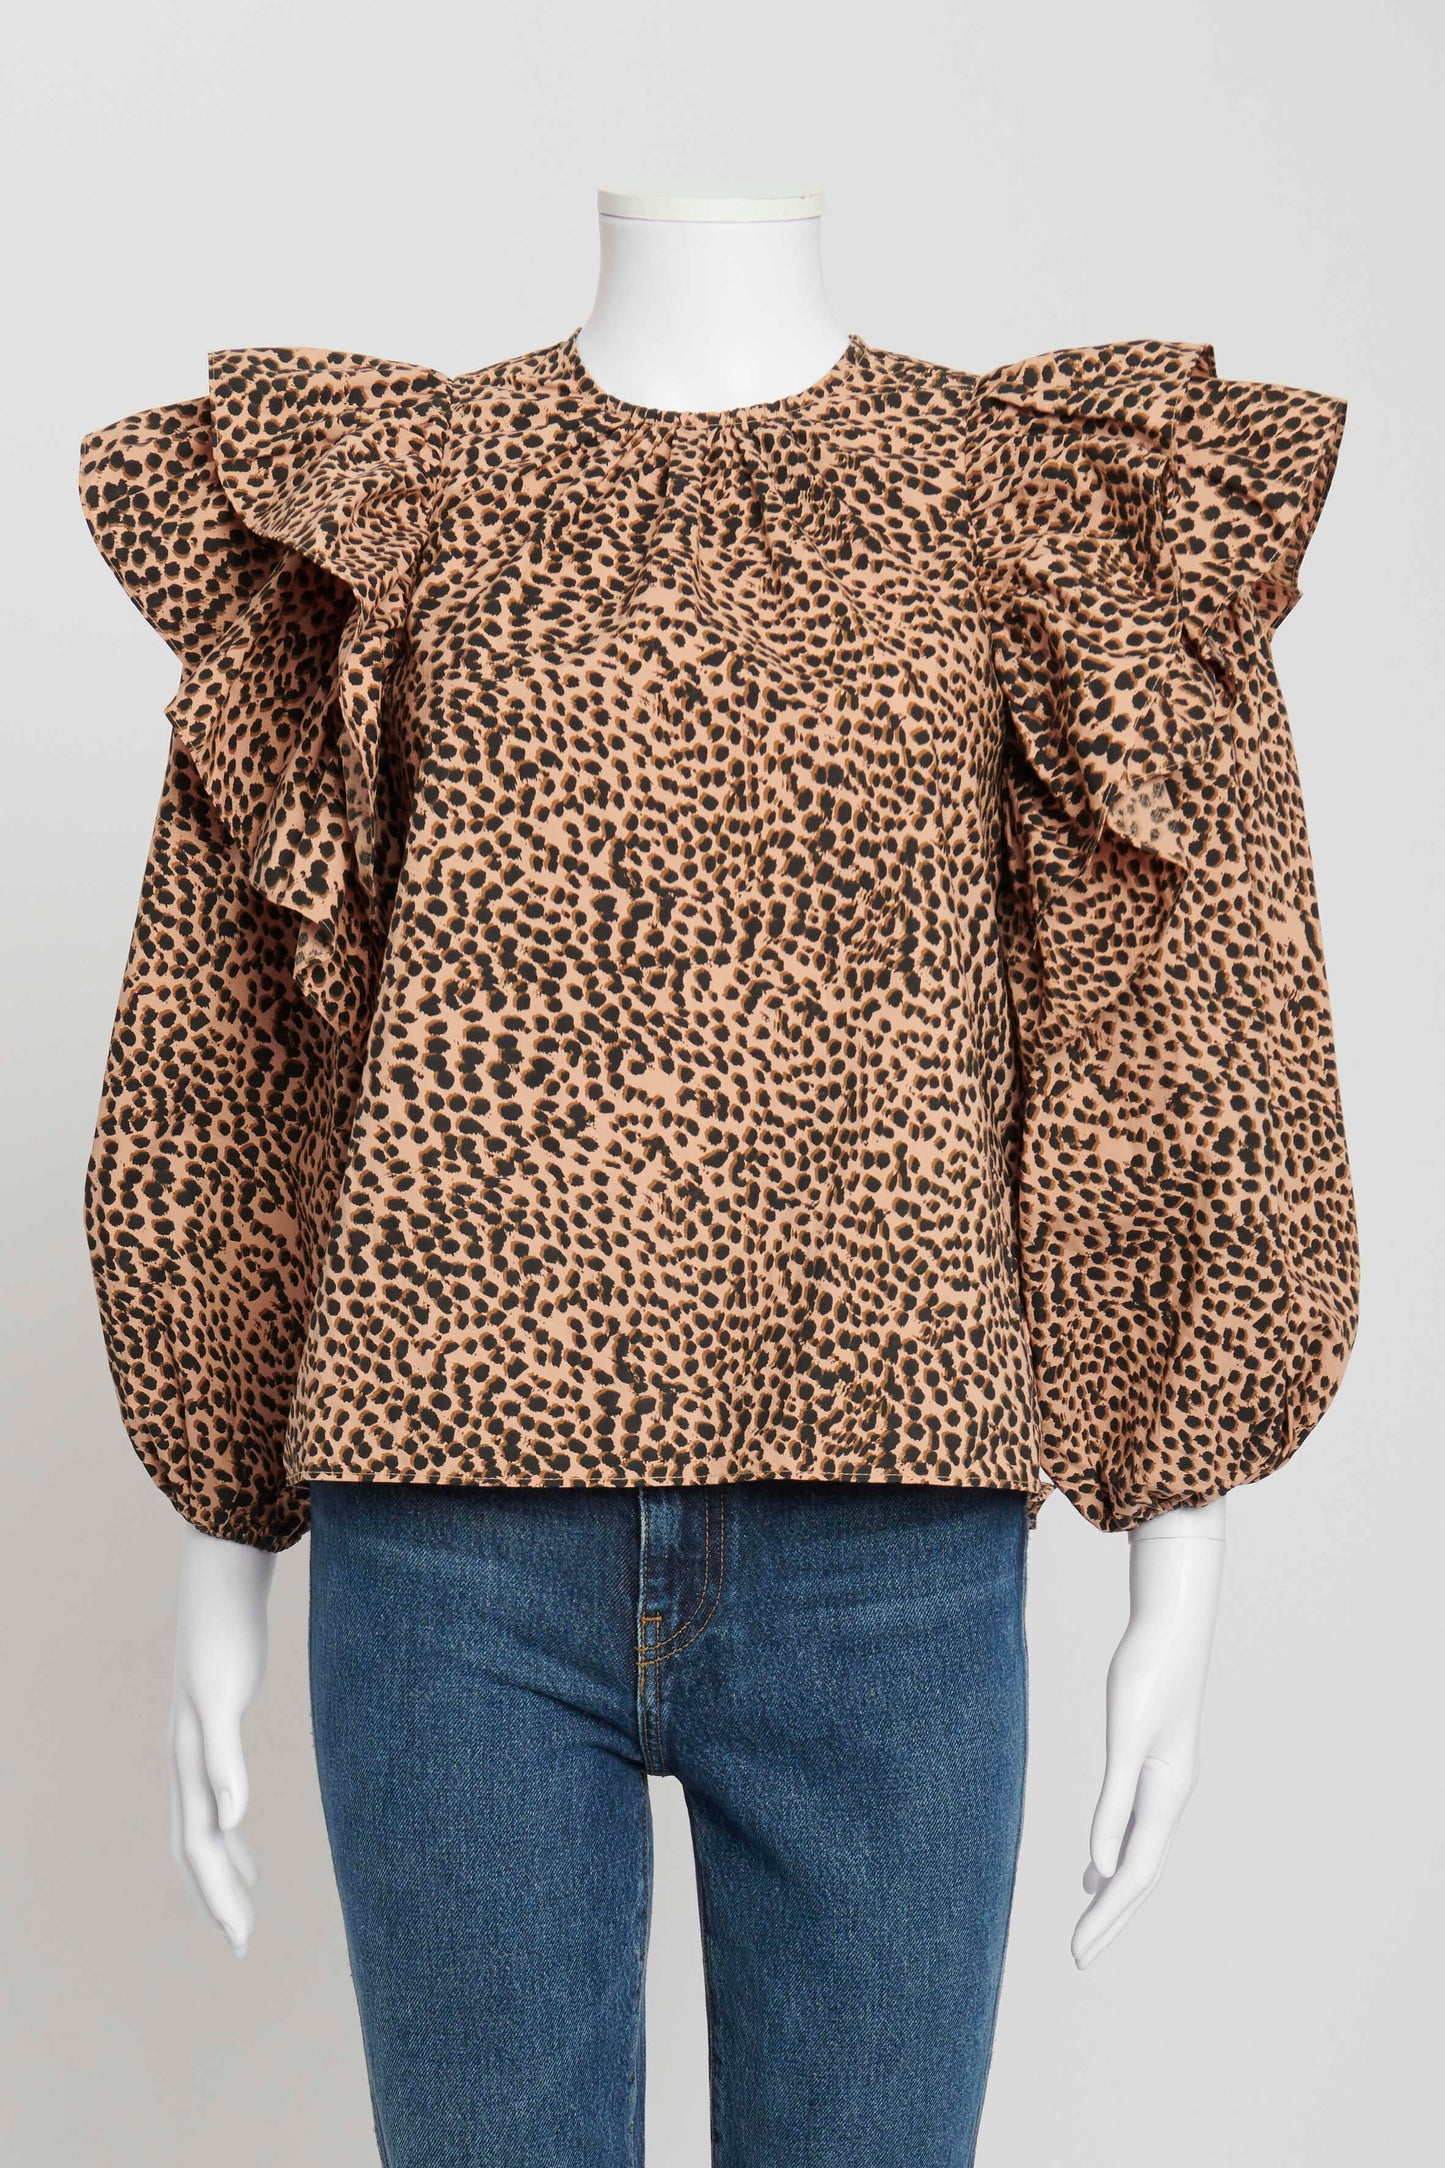 Mocha and Black Dotted Caasi Blouse